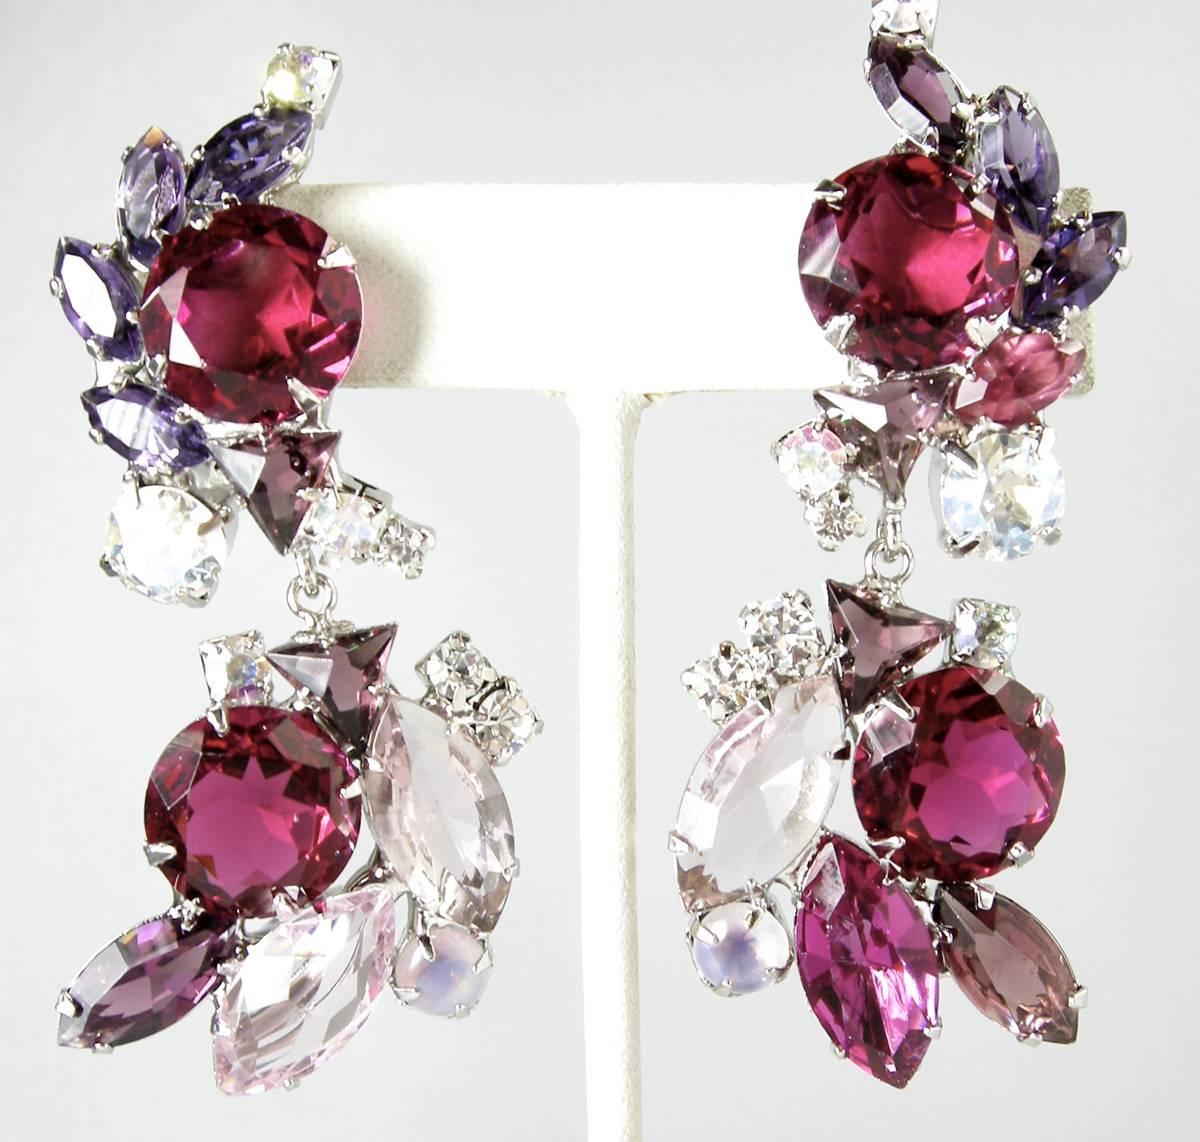 These one of a kind earrings by Robert Sorrell feature rich red and clear faceted crystals in a silver-tone setting. These clip earrings measure 3-1/2” x 1-1/8” and are signed “Sorrell Originals”. These are earrings are in excellent condition.